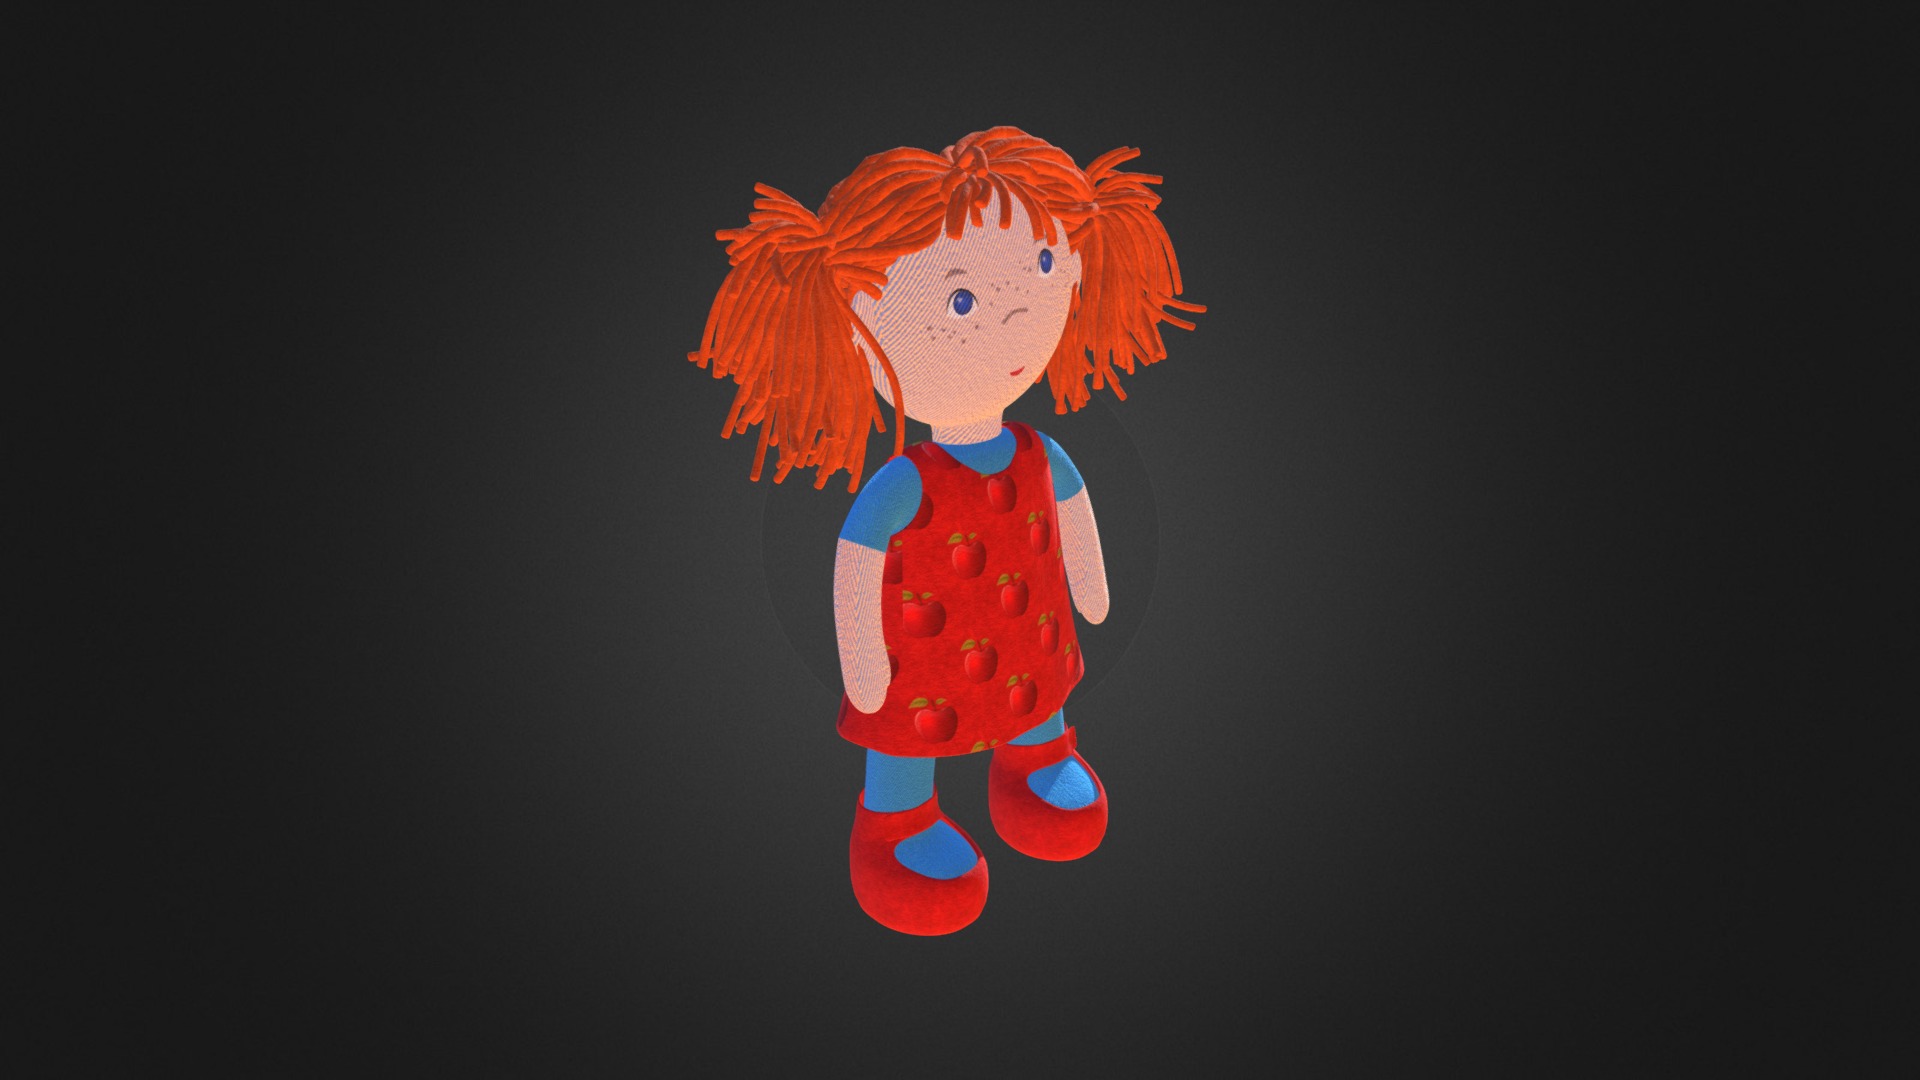 3D model Doll - This is a 3D model of the Doll. The 3D model is about a red and blue toy.